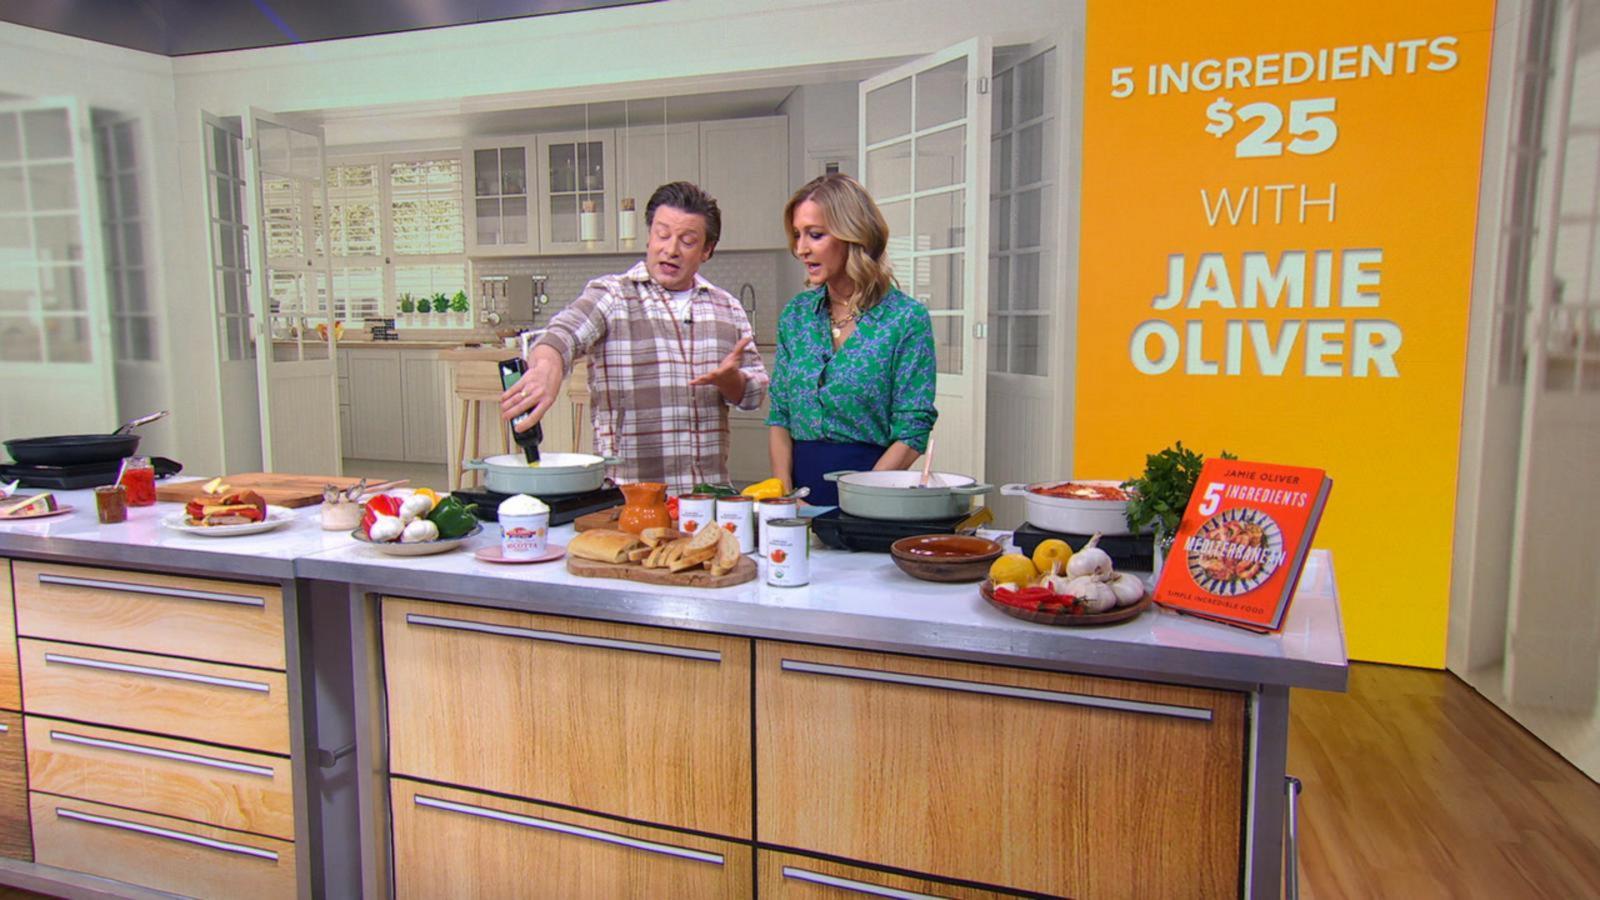 Jamie Oliver's New Cookbook: A Conversation with the Super Chef!